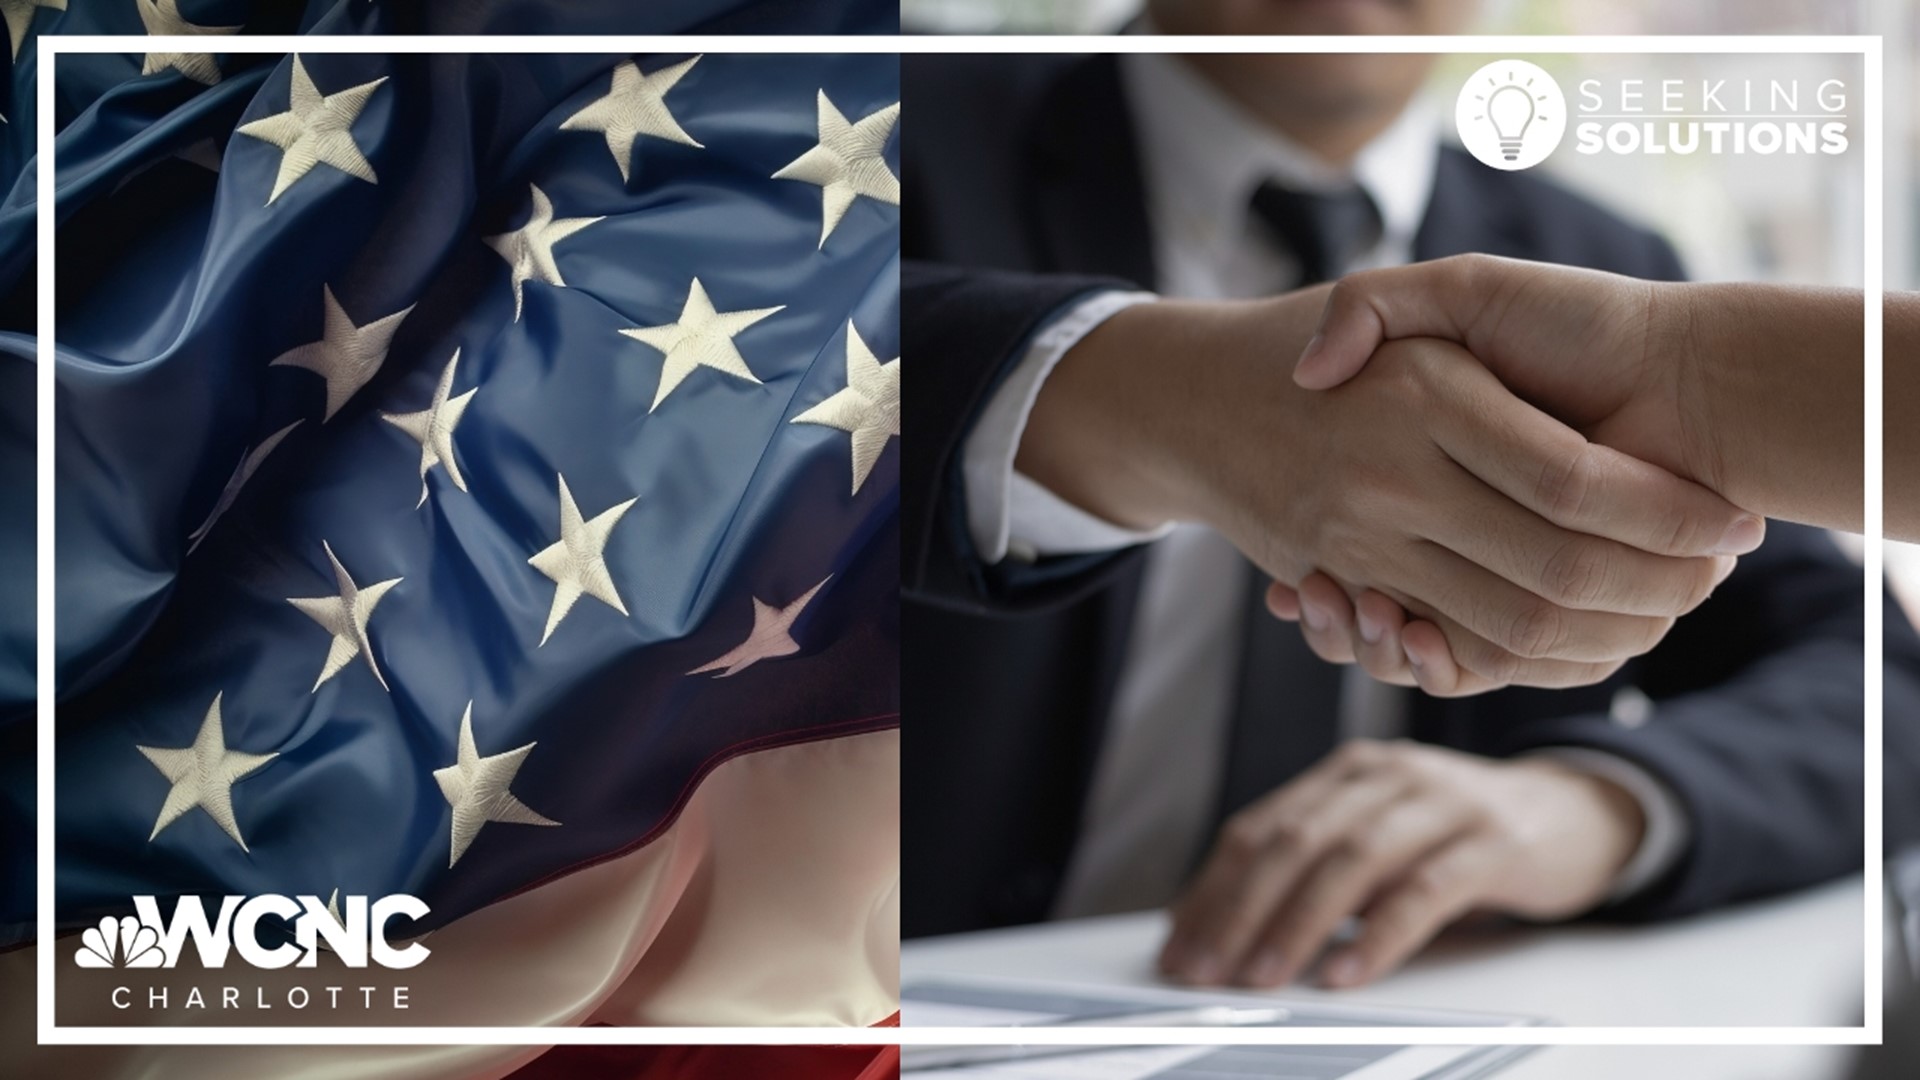 Atrium Health and the US Army have started a partnership to create opportunities for veterans.